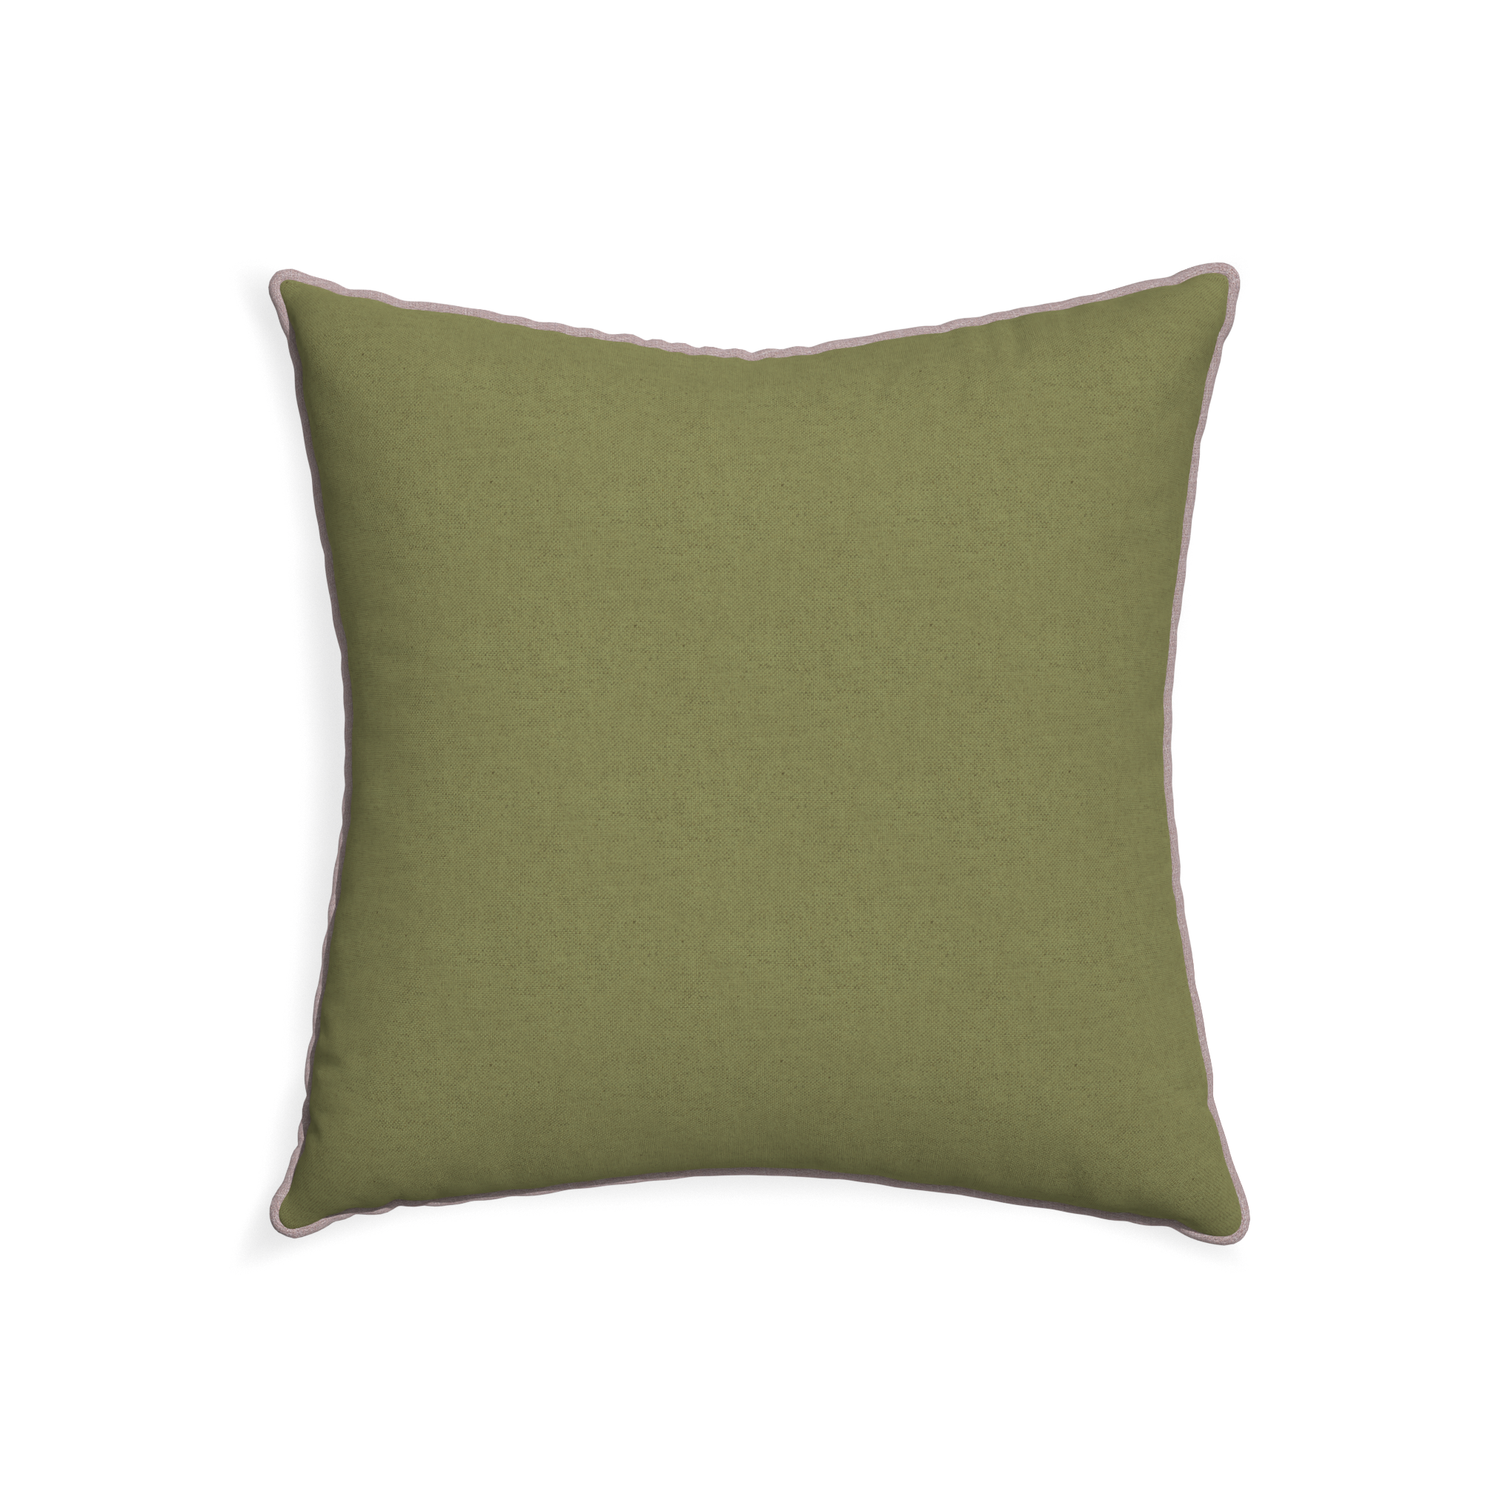 22-square moss custom moss greenpillow with orchid piping on white background